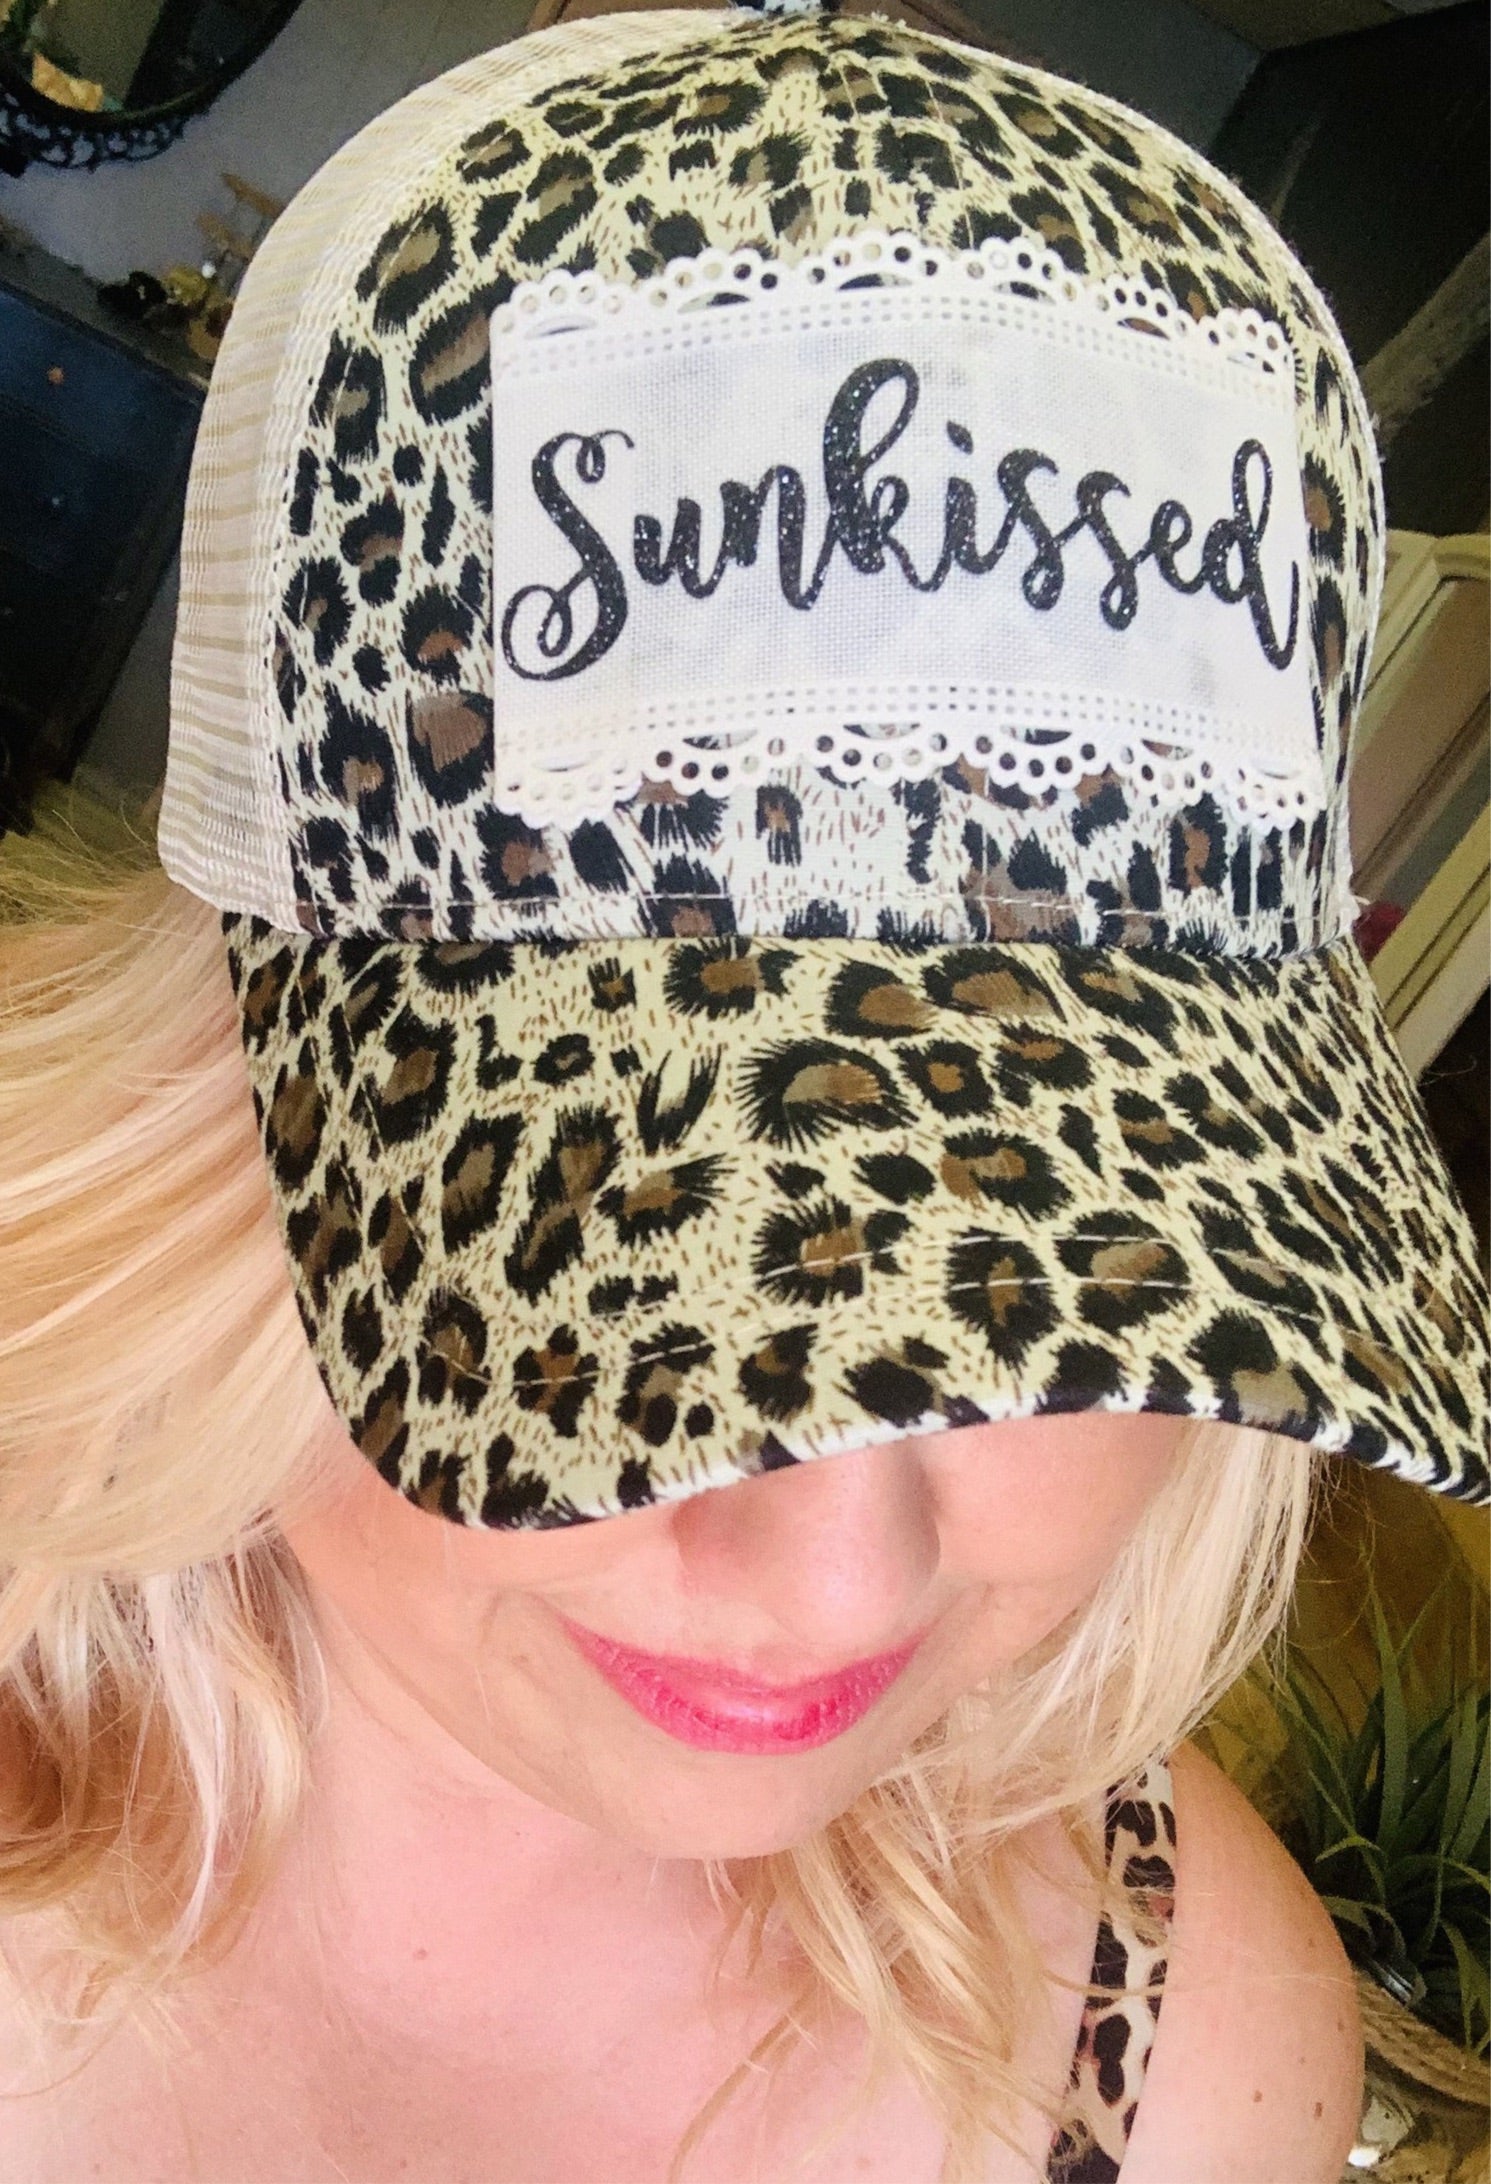 SUN KISSED hat Leopard Summertime Vacation cap Sunshine - Stacy's Pink Martini Boutique